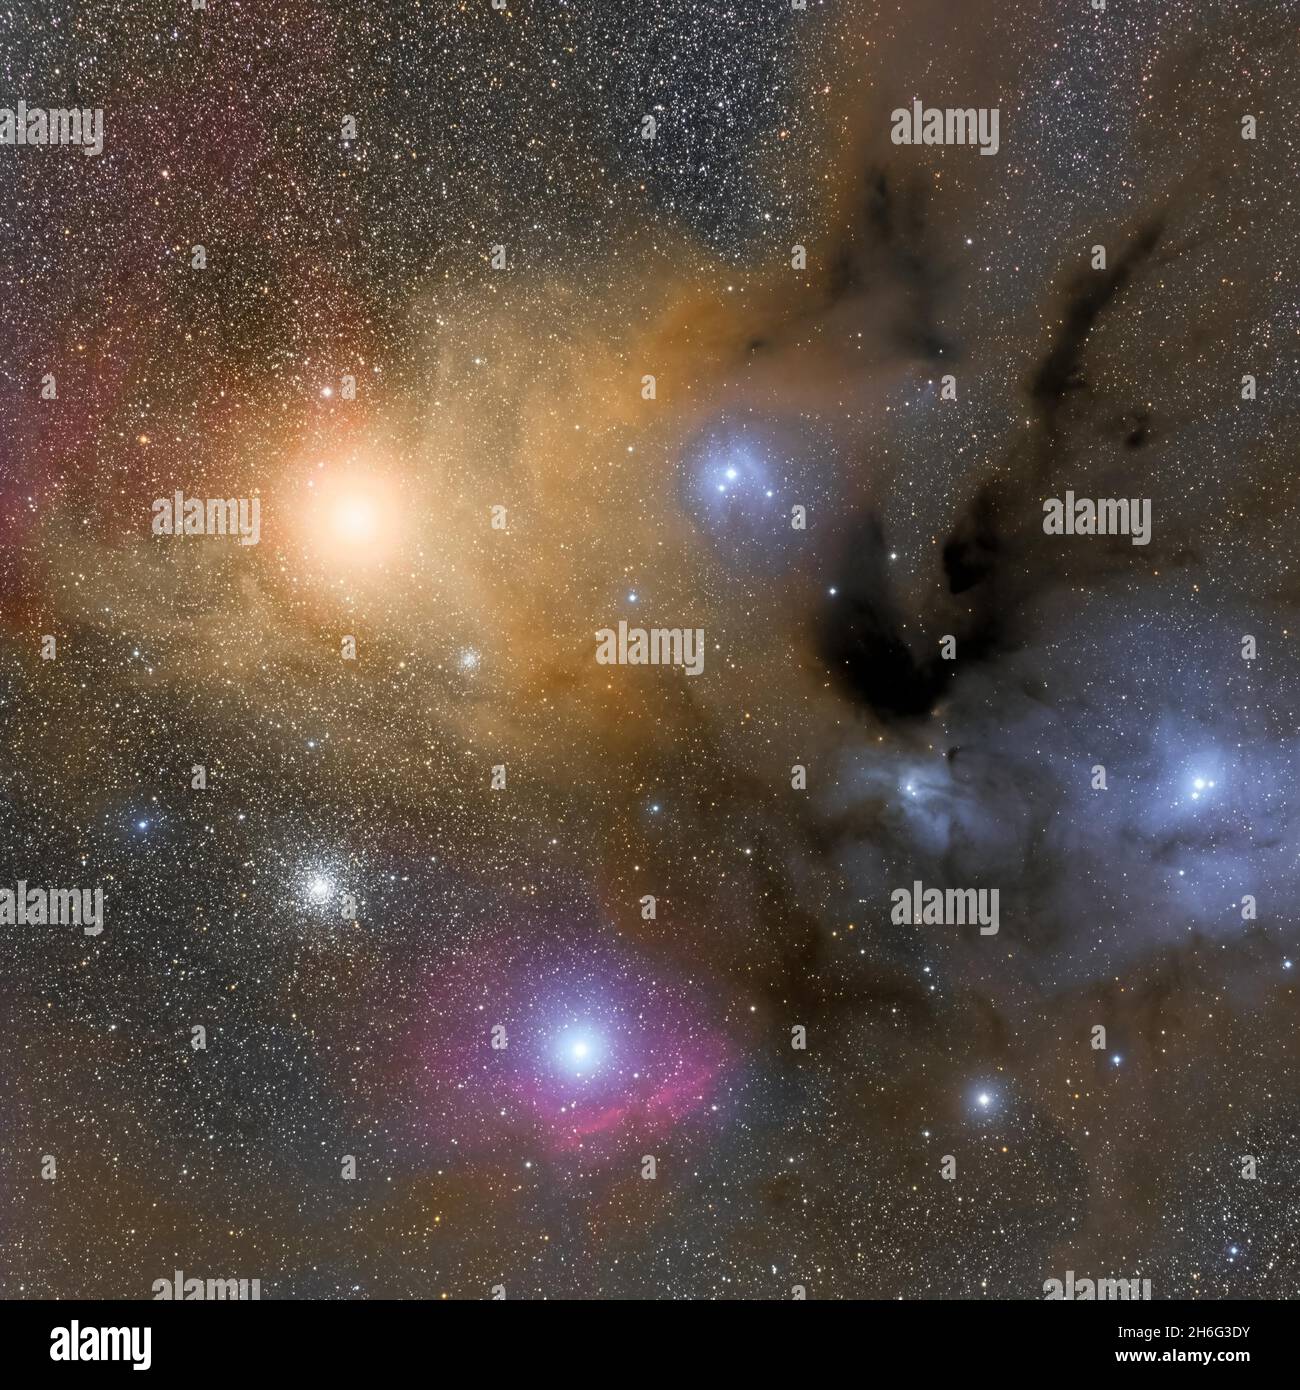 Rho Ophiuchi (ρ Ophiuchi) is a multiple star system in the constellation Ophiuchus. The central system has an apparent magnitude of 4.63. Stock Photo